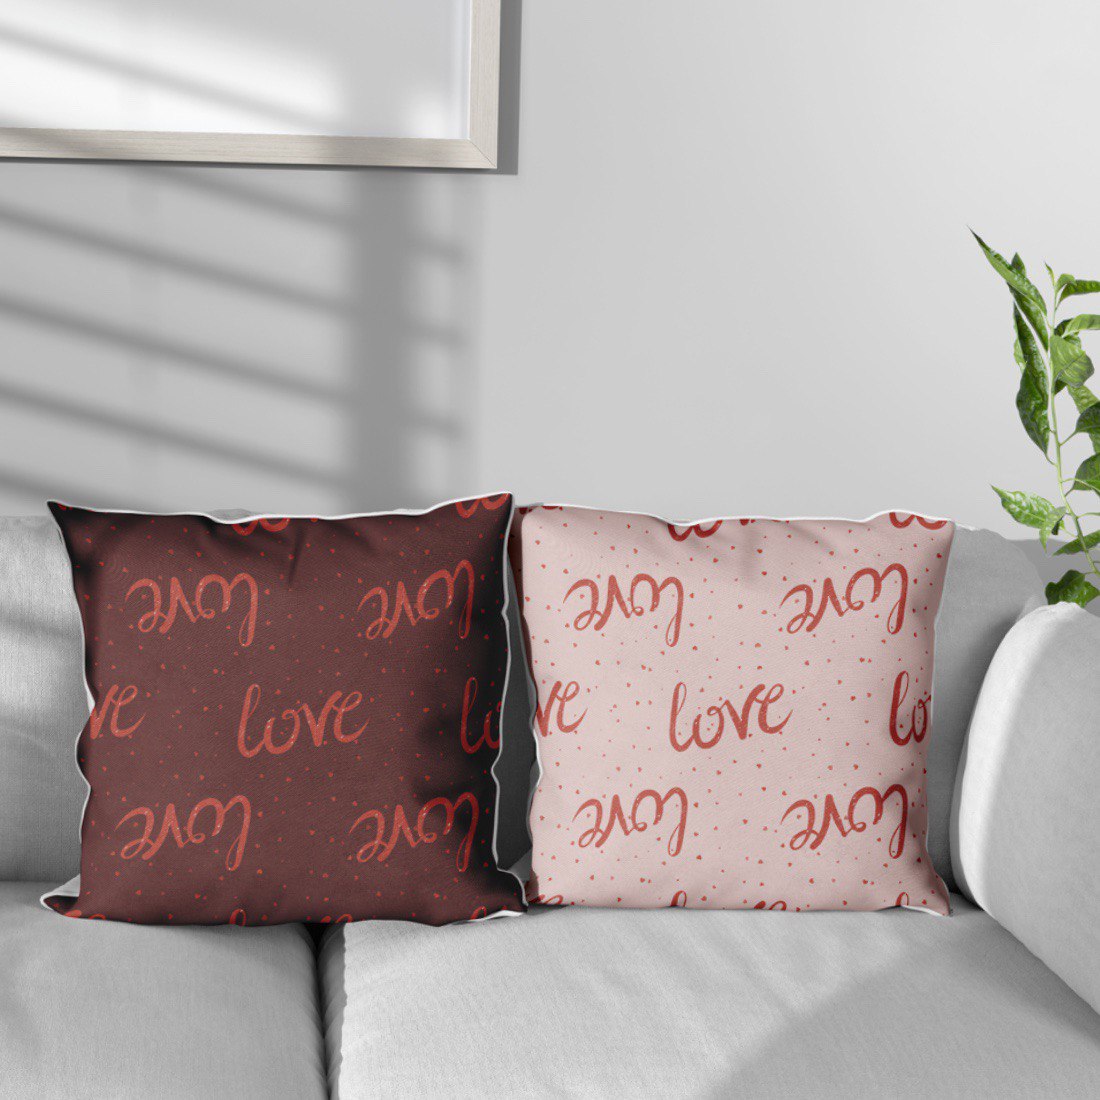 Image of pillows with exquisite patterns with the inscription love